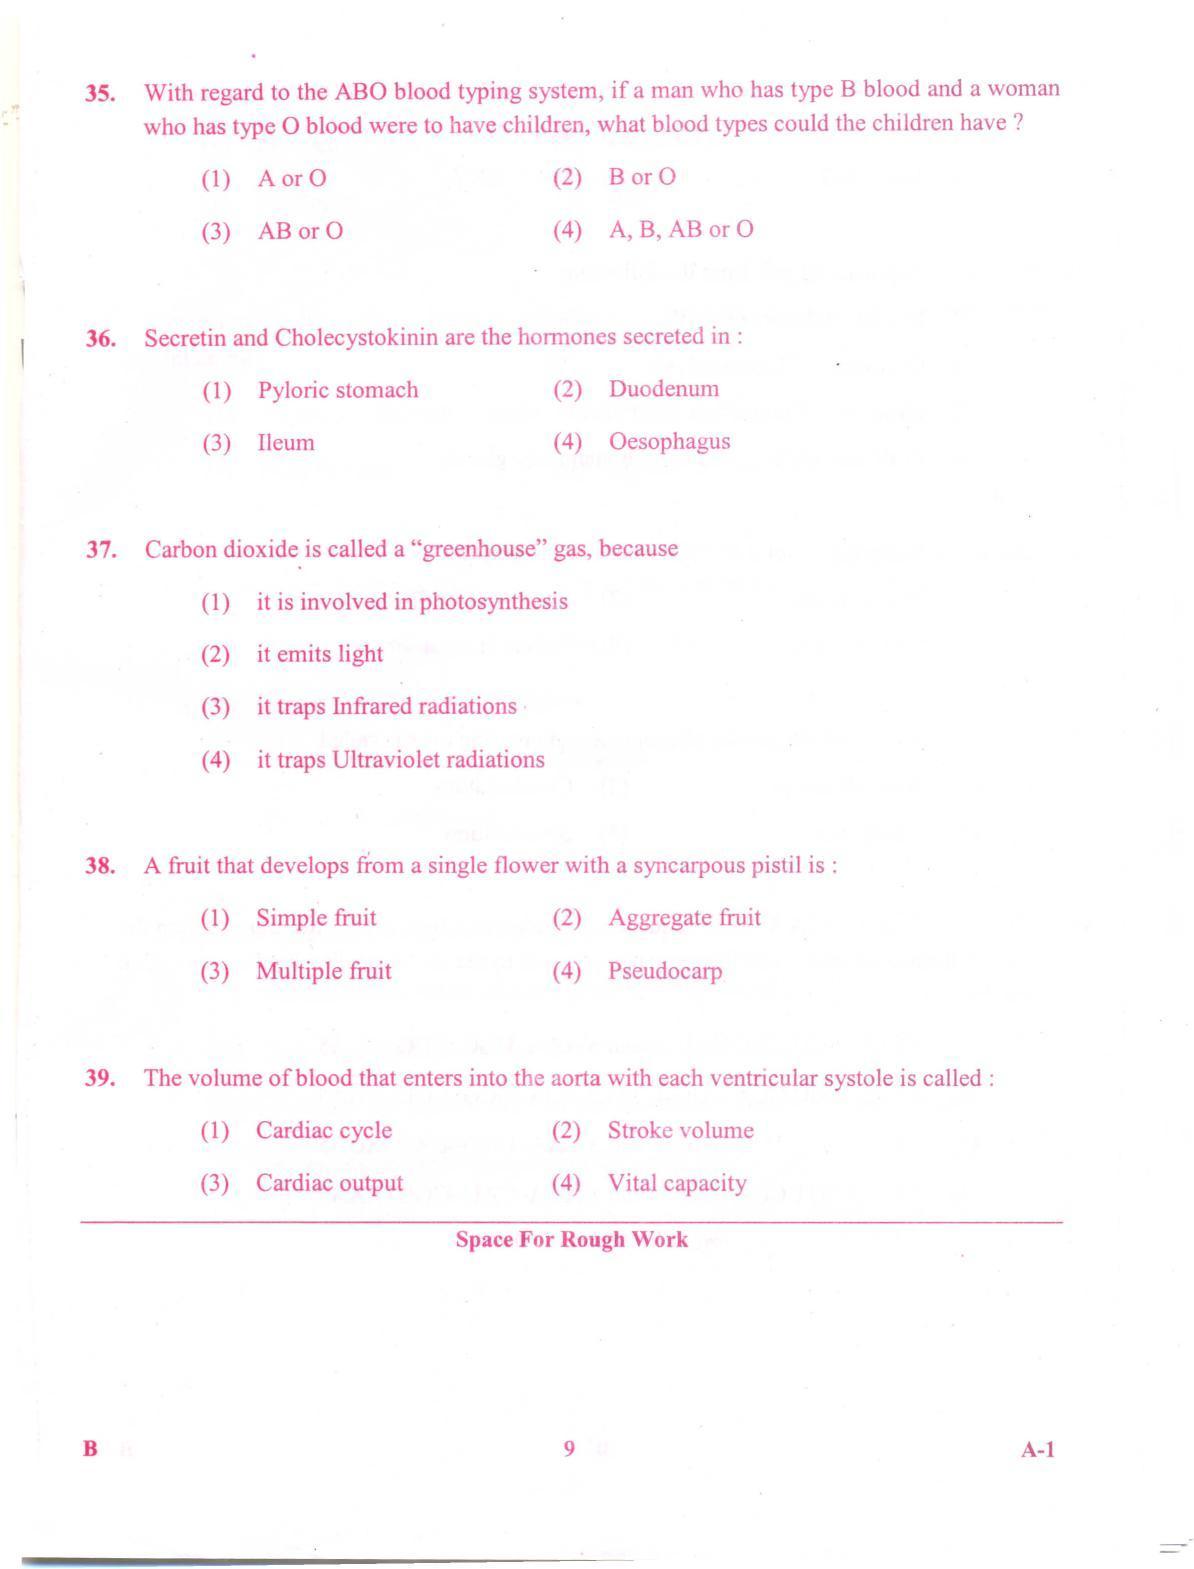 KCET Biology 2012 Question Papers - Page 9